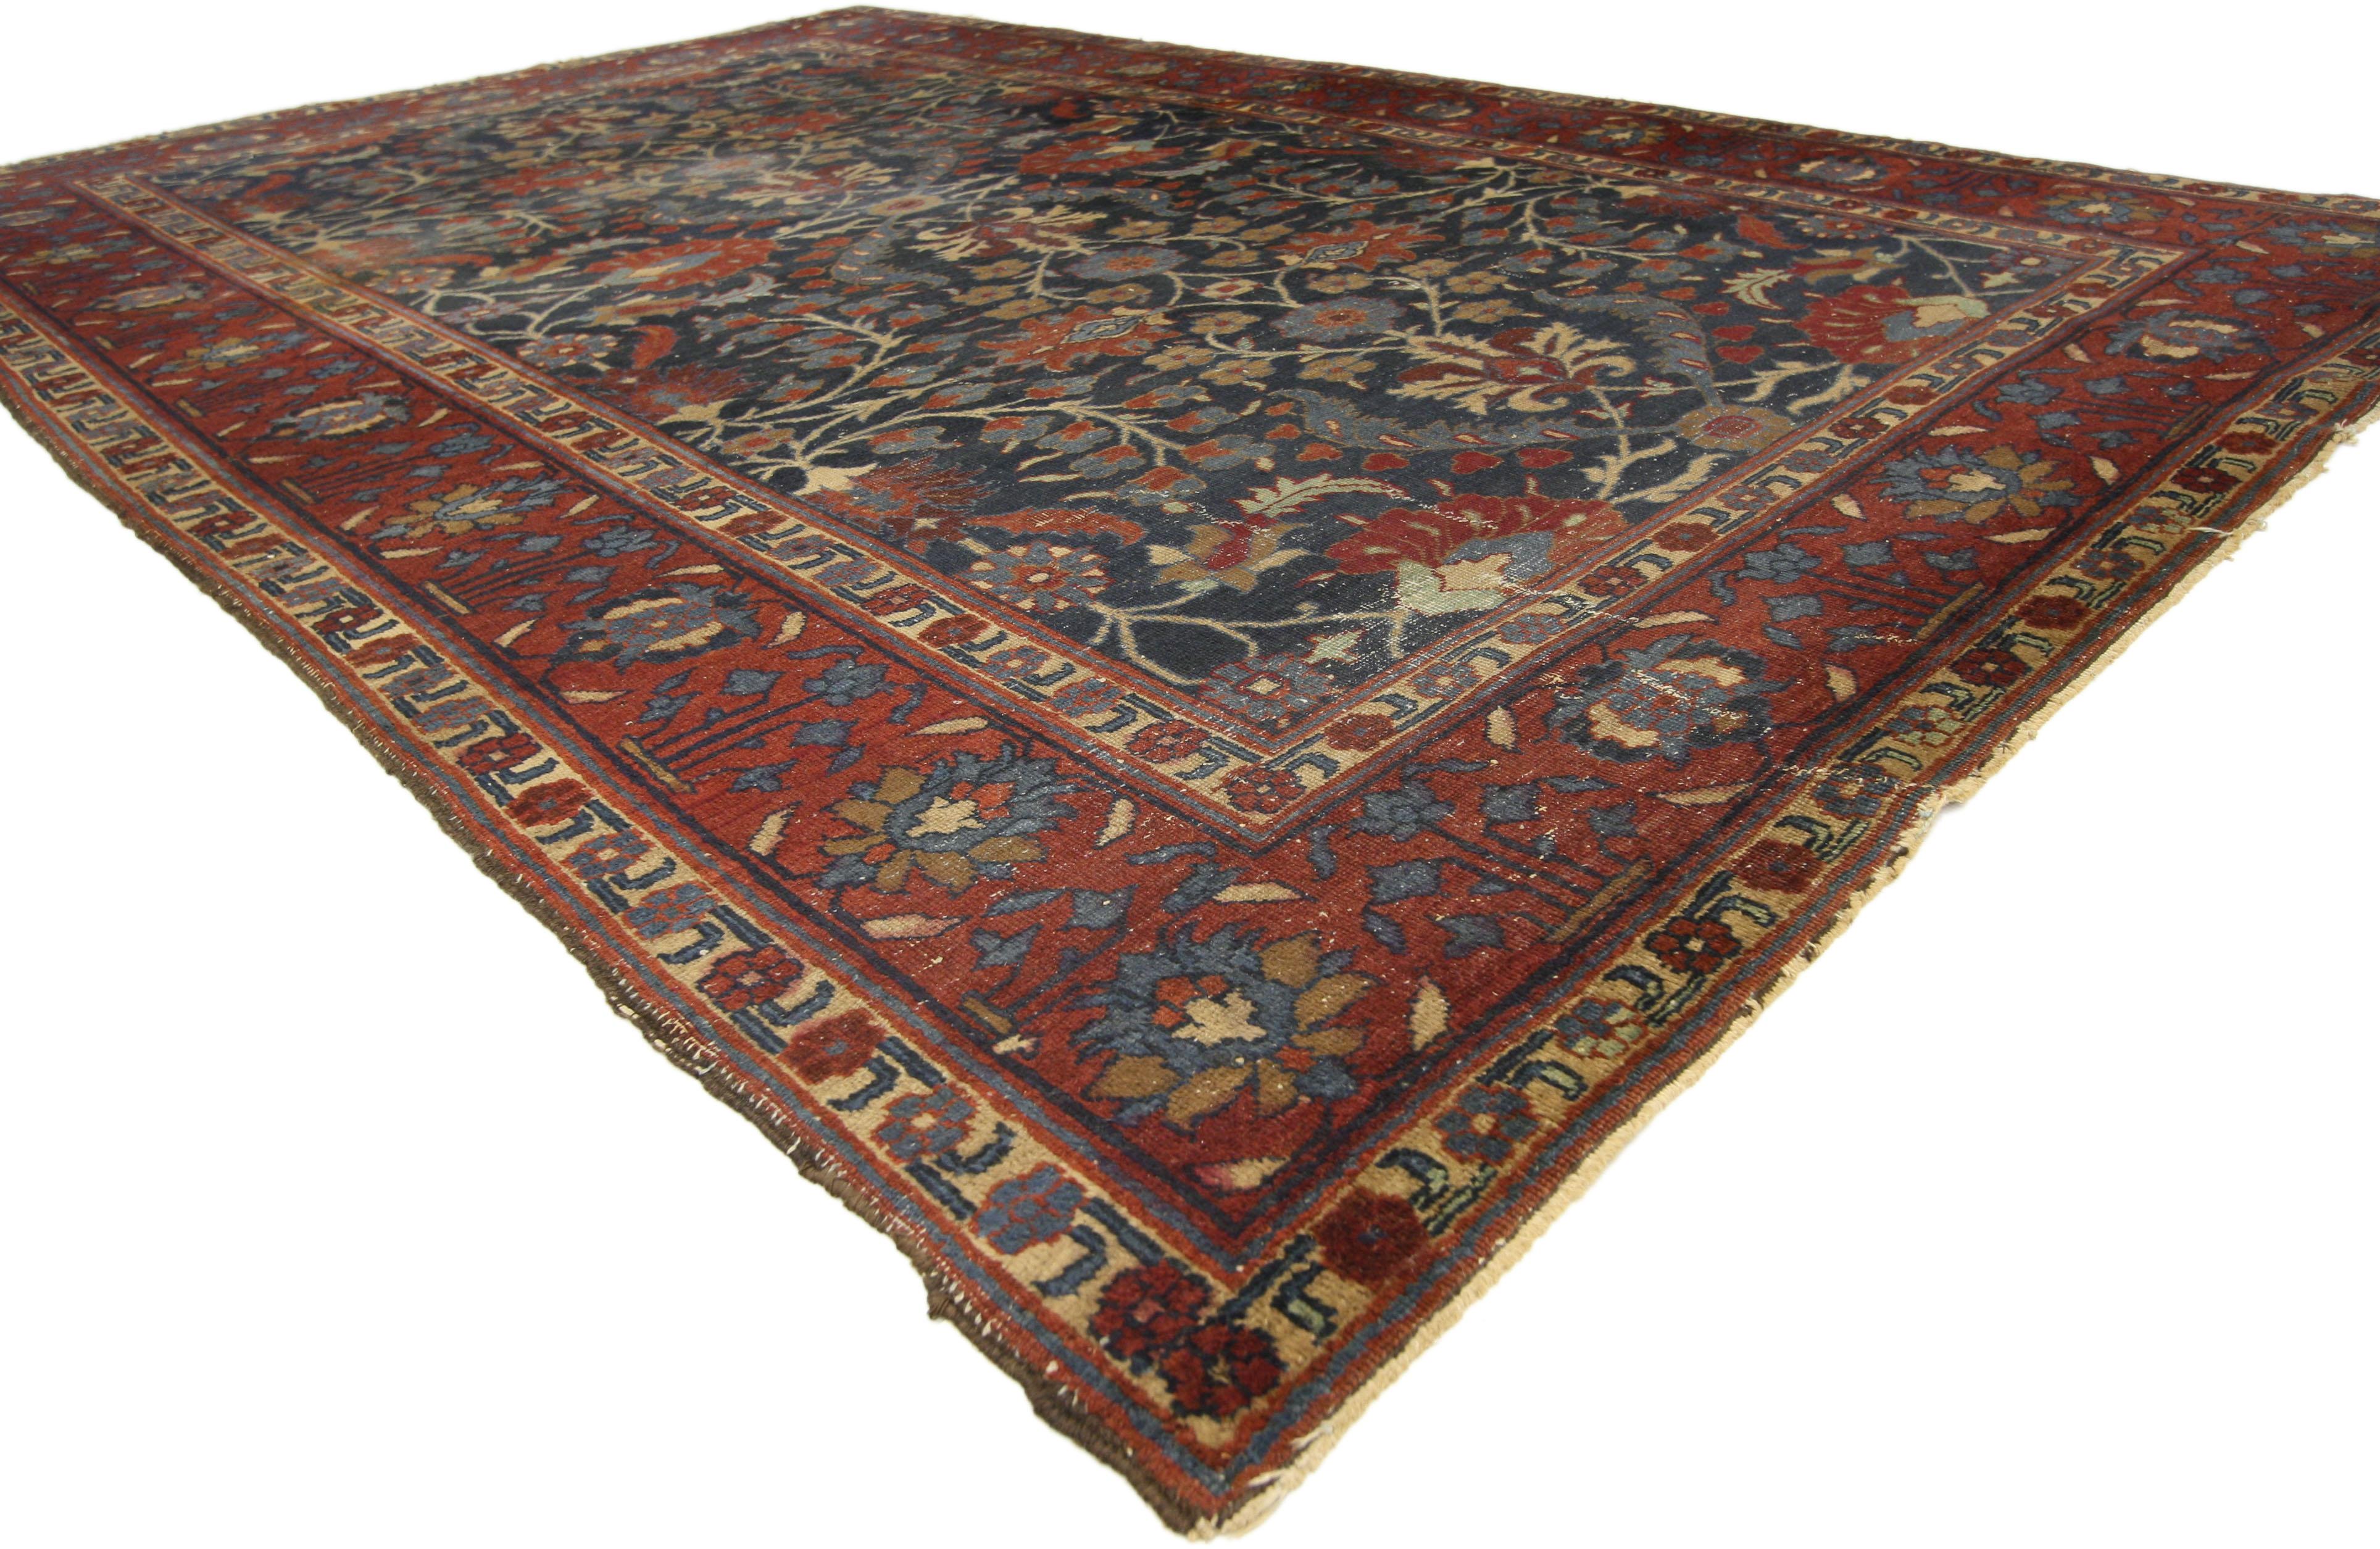 77170 Antique-Worn Persian Tabriz Rug, 05'11 x 09'03.
Introducing the epitome of elegance and grace, behold the hand-knotted wool antique Persian Tabriz! This magnificent masterpiece boasts a traditional style that will leave you in awe. Picture a